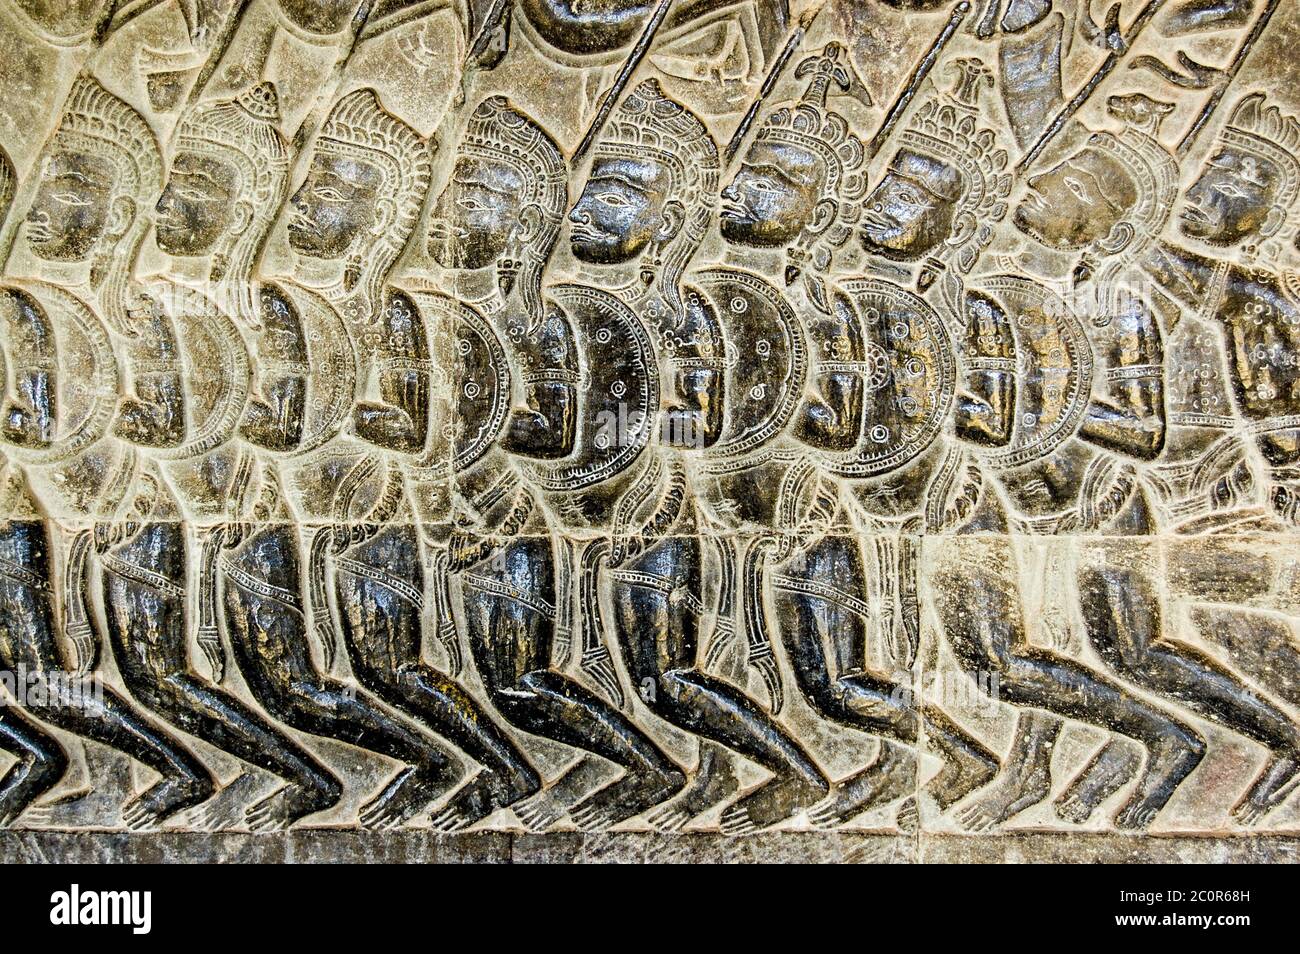 Bas relief of Pandava soldiers marching to the Battle of Kurukshetra as described in the Mahabharata. Eleventh century carving, wall of Angkor Wat tem Stock Photo